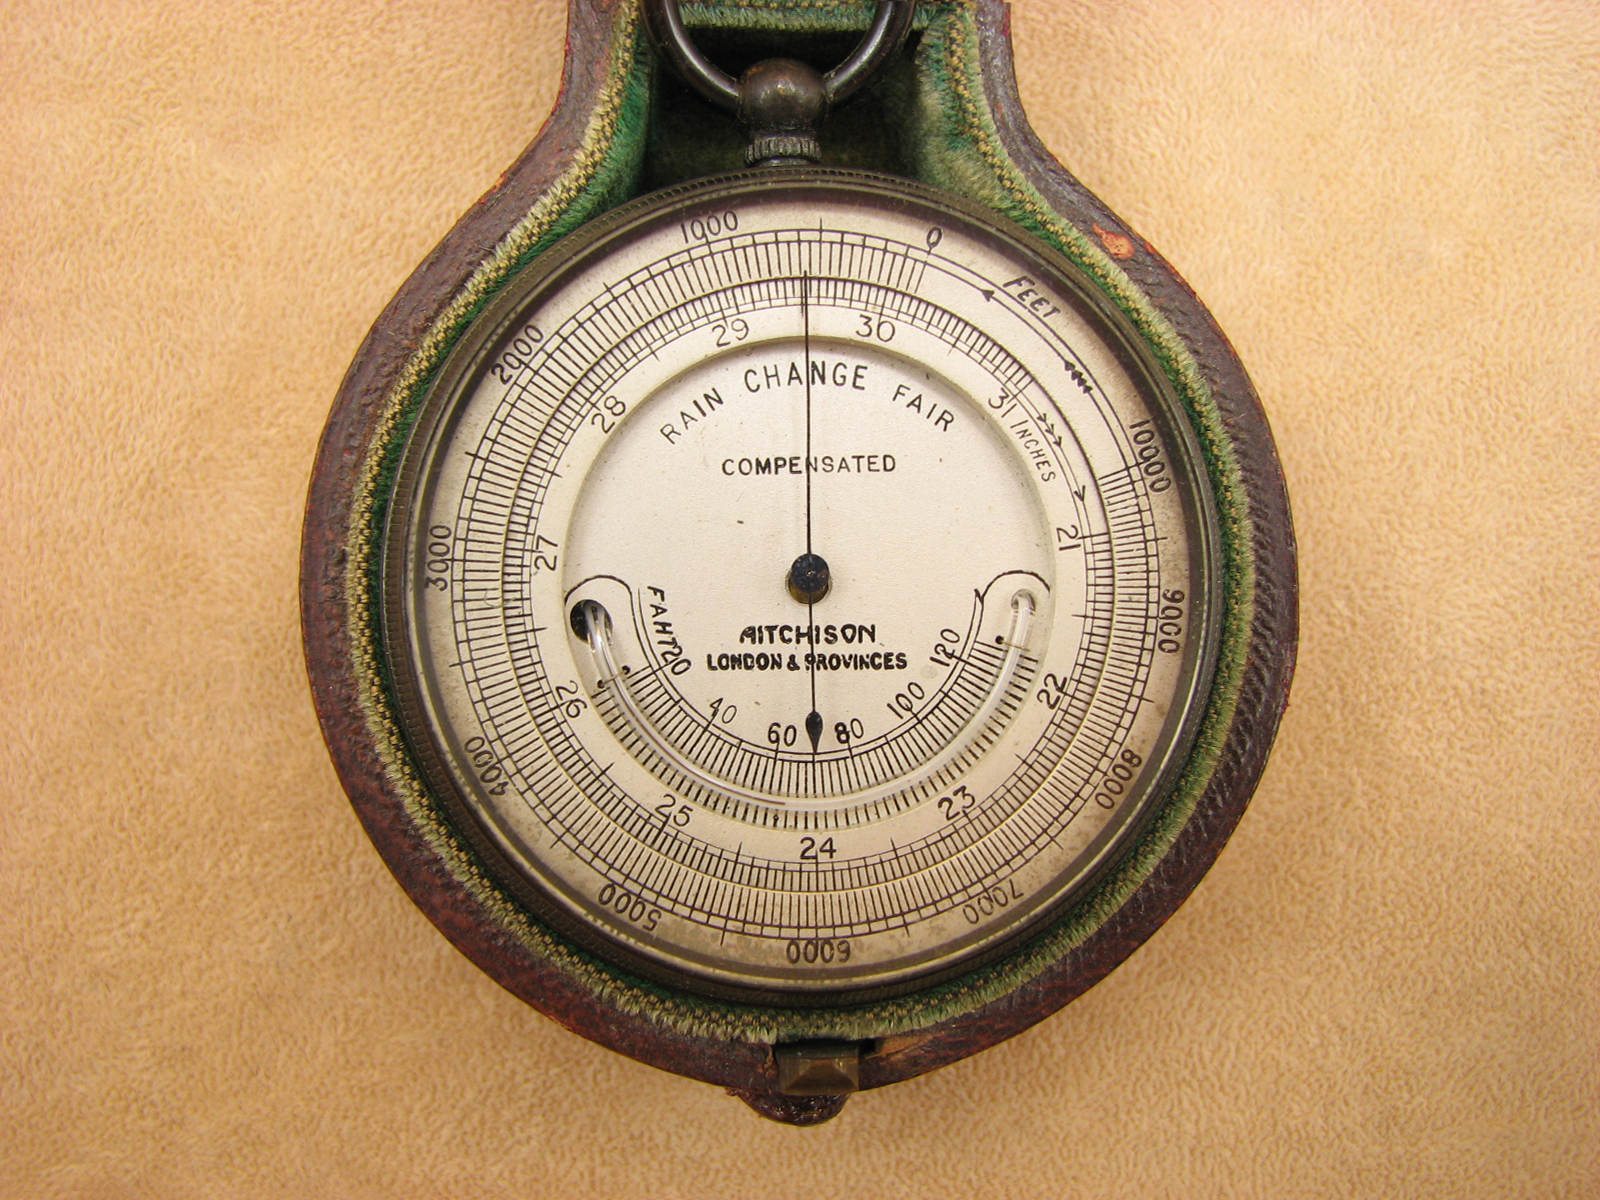 Antique pocket barometer with curved thermometer signed Aitchison London & Provinces